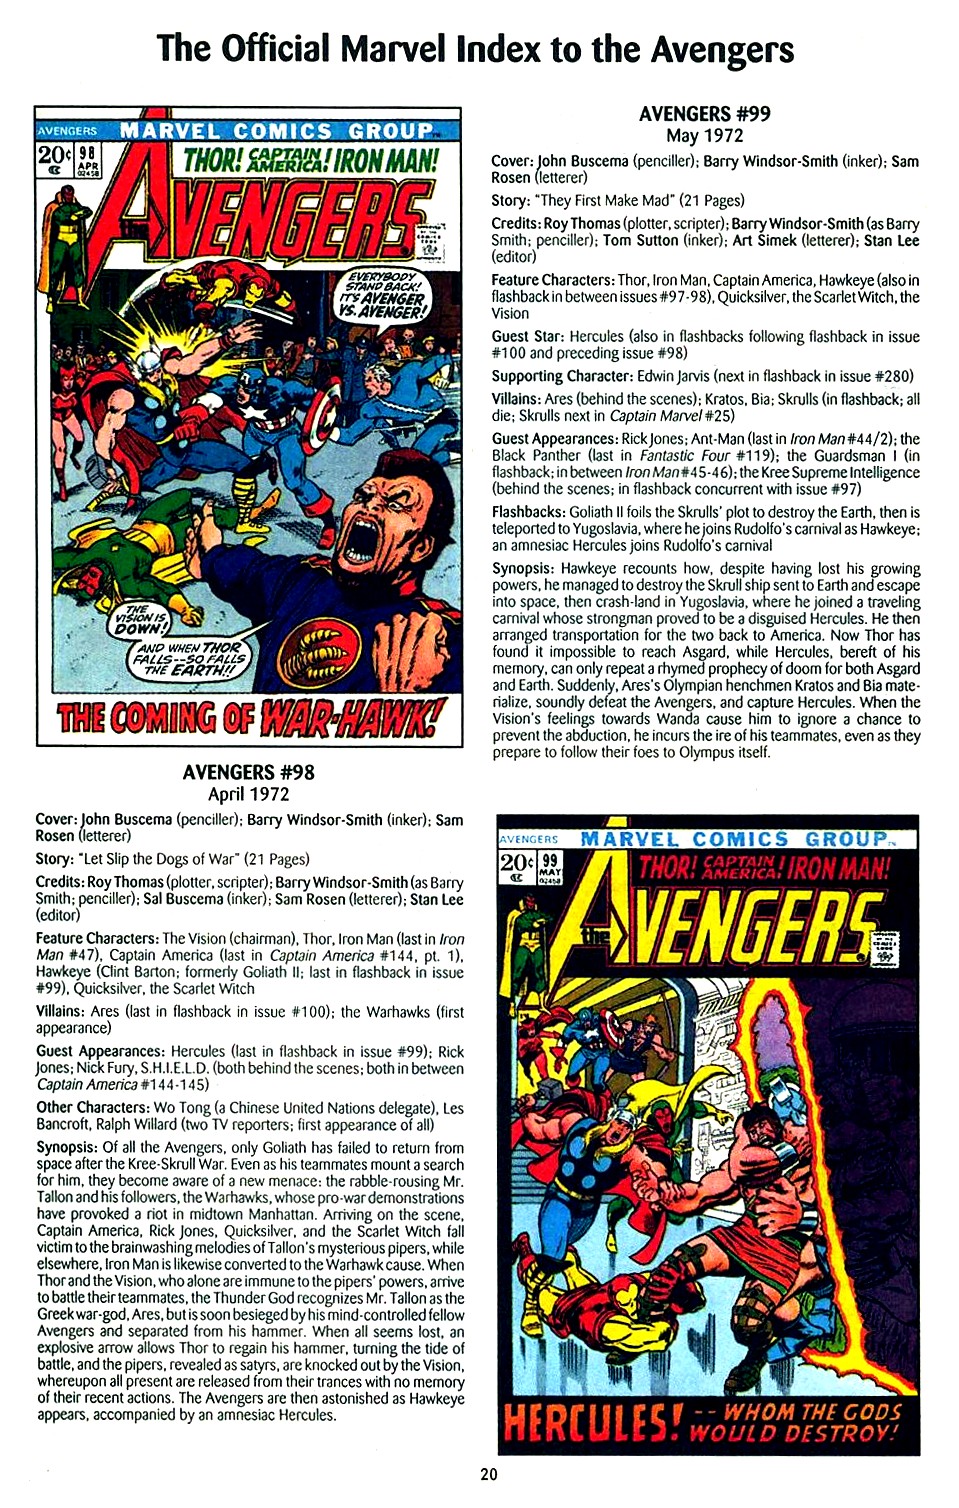 Read online The Official Marvel Index to the Avengers comic -  Issue #2 - 22